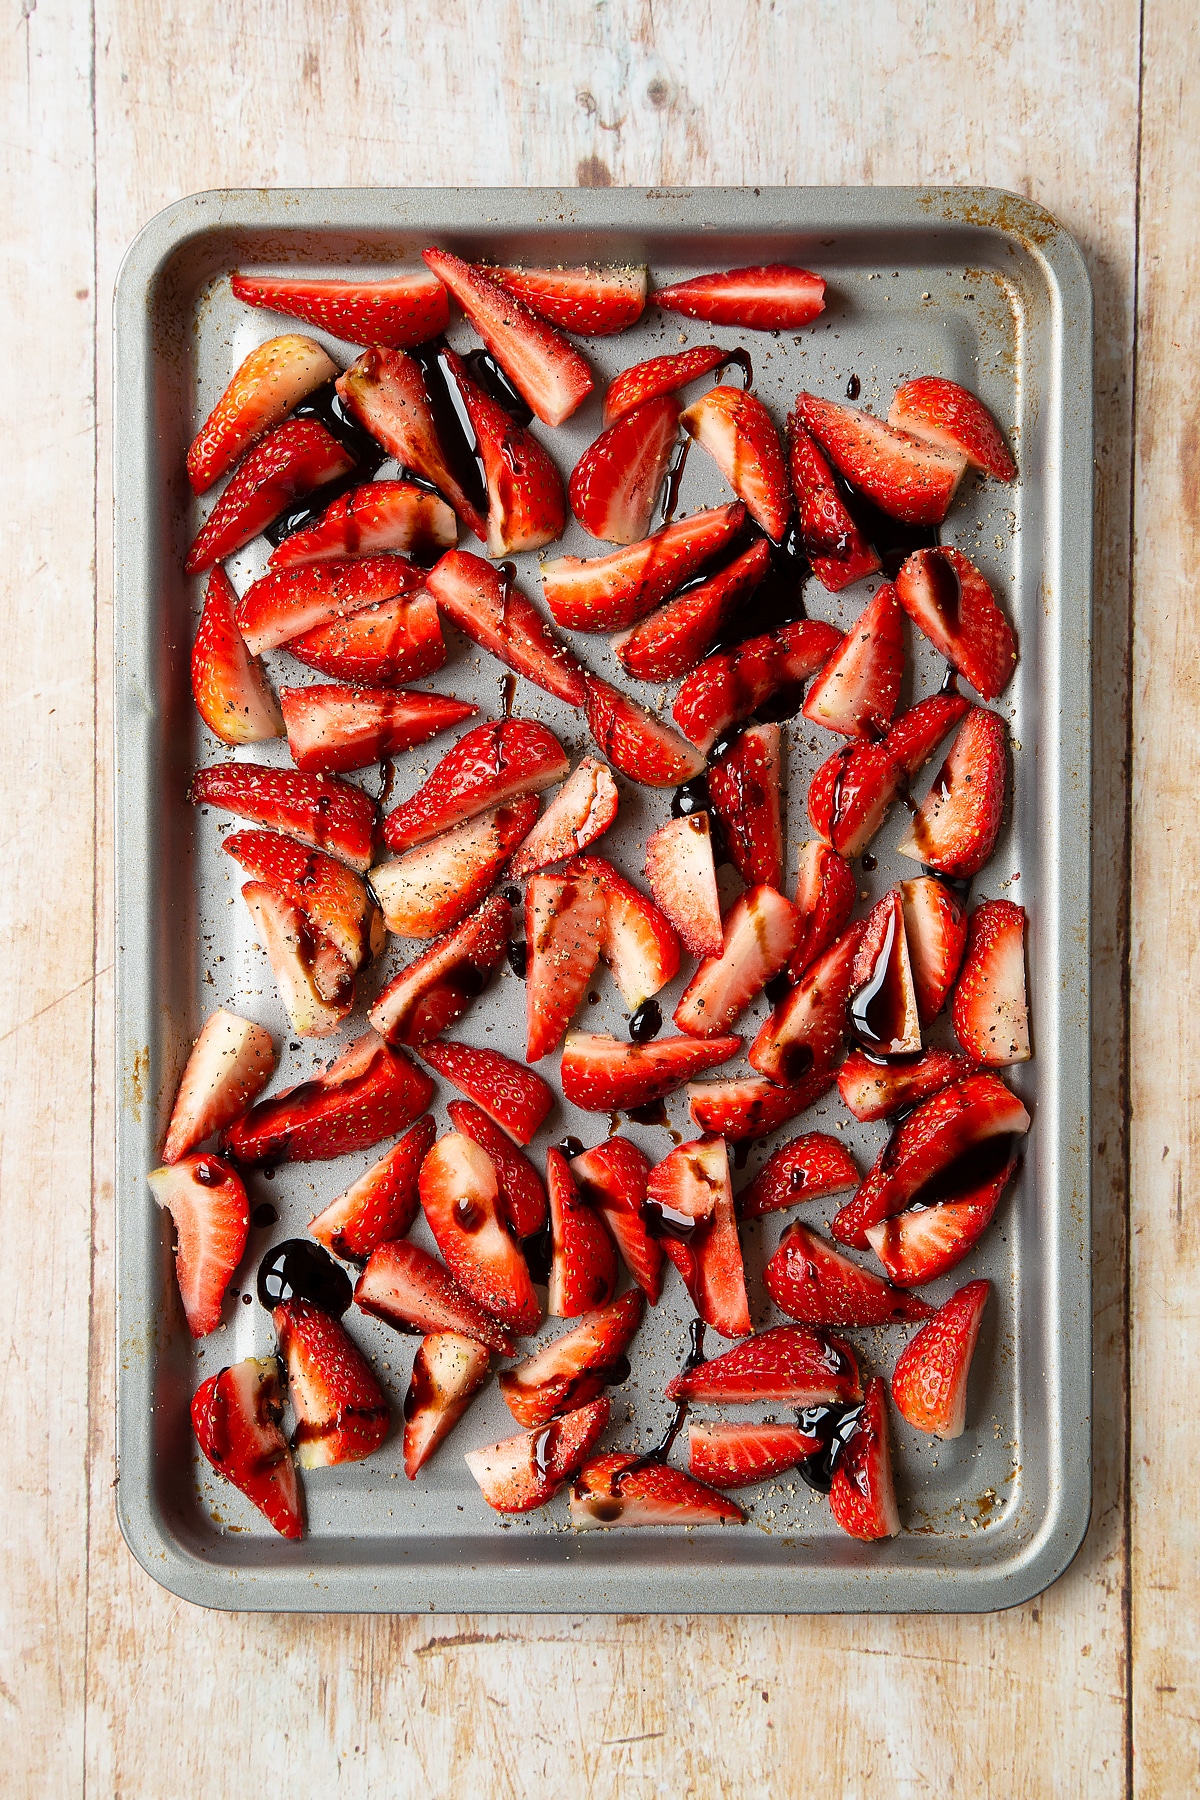 Strawberries sliced into quarters on a non-stick tray, seasoned with pepper and drizzled with balsamic glaze.